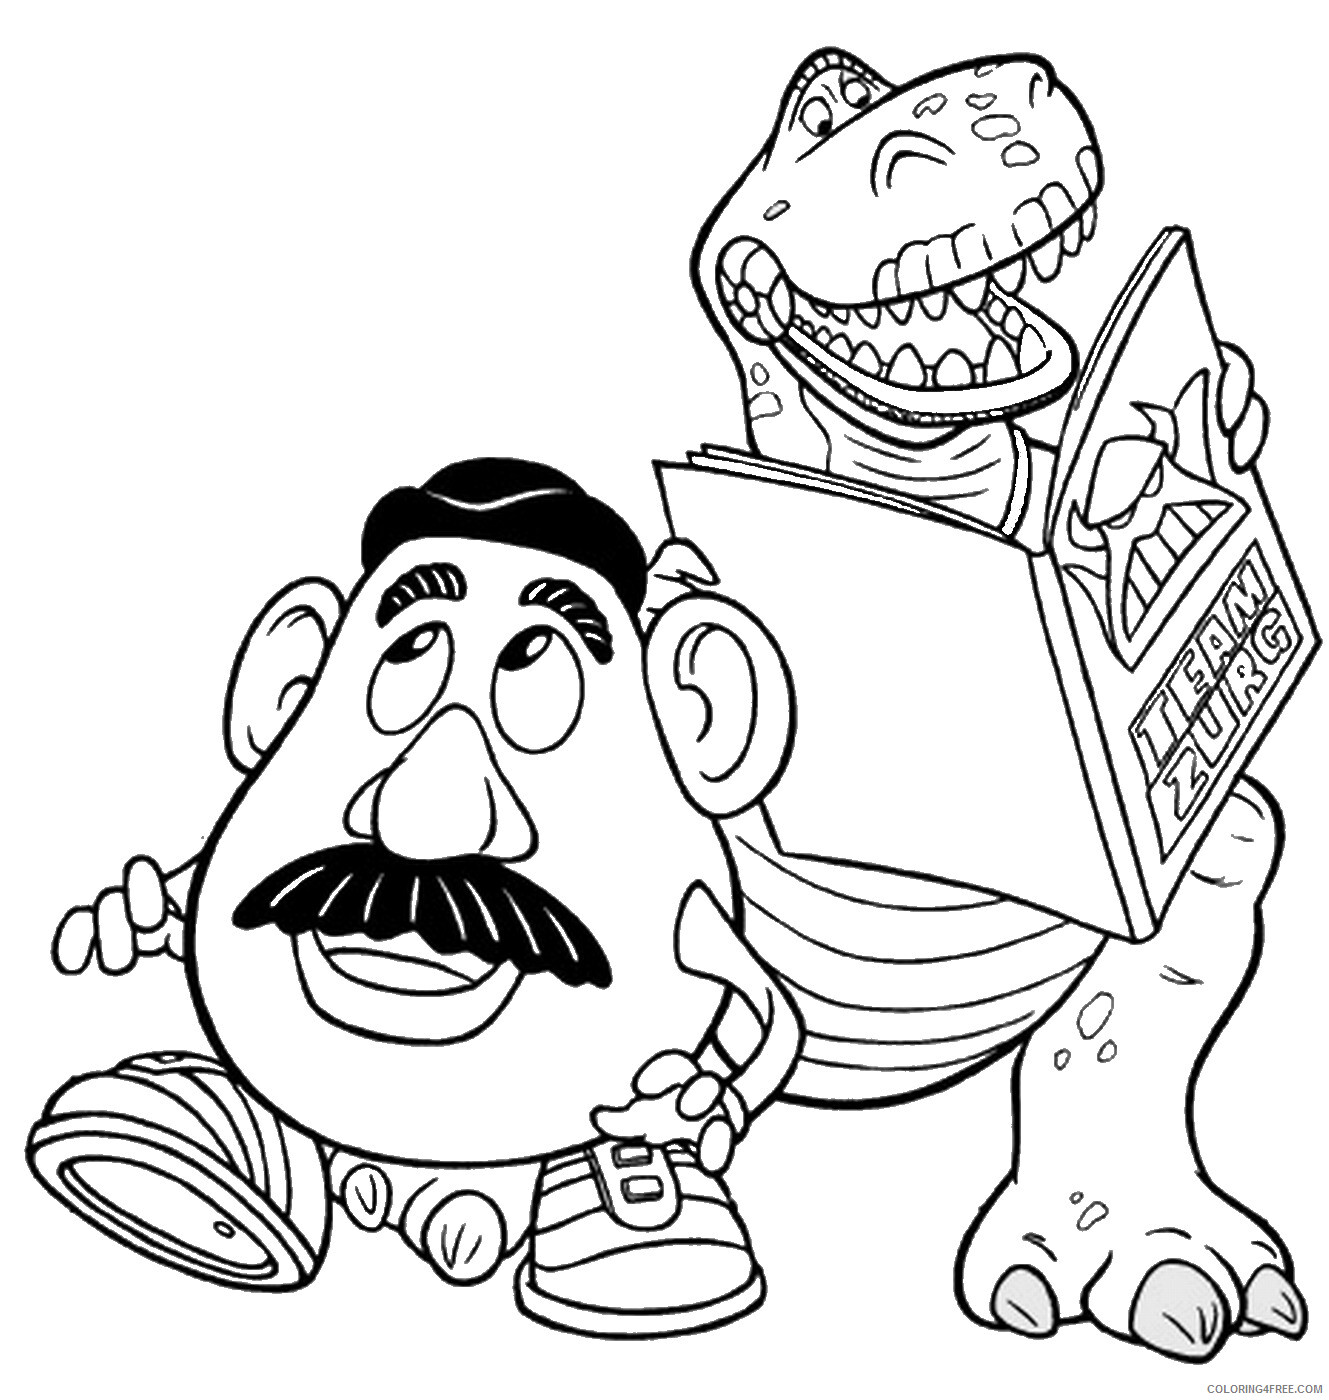 Toy Story Coloring Pages TV Film toystory_71 Printable 2020 10386 Coloring4free